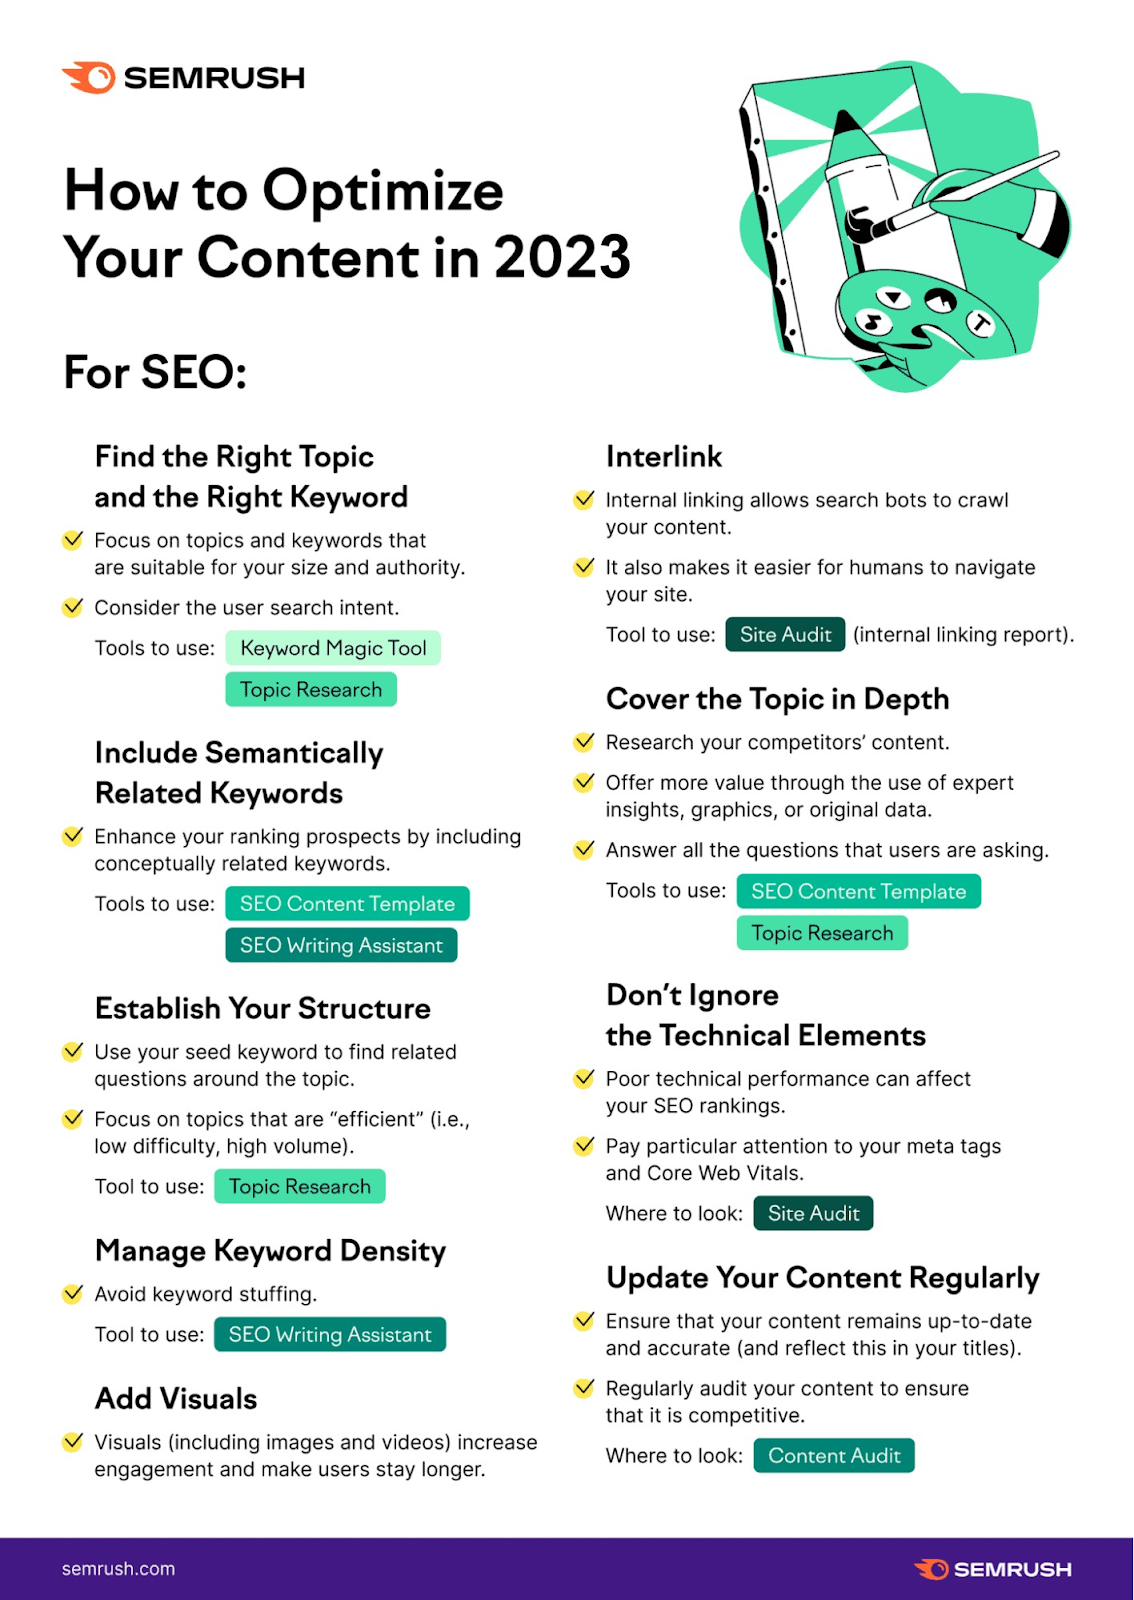 Semrush's infographic listing a checklist for how to optimize content in 2023